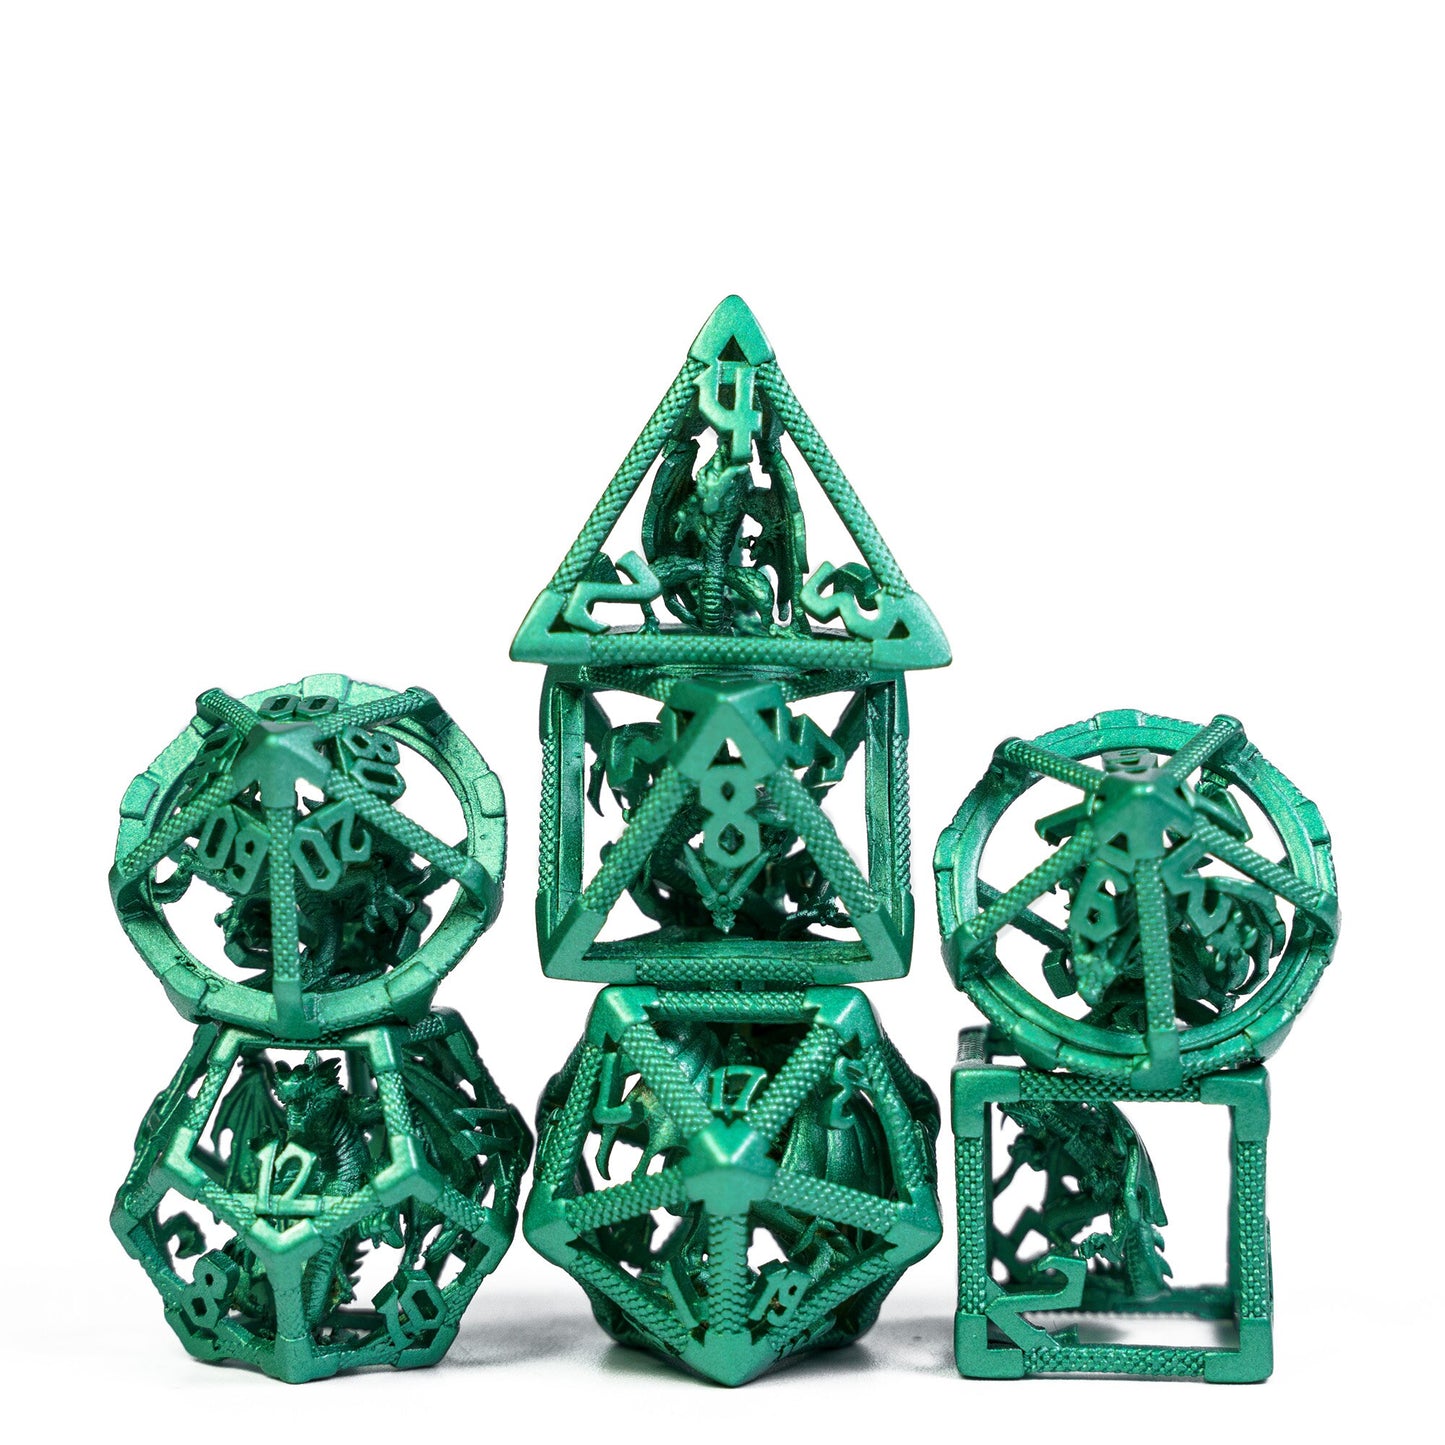 Drake's Nest - Hollow Metal Dice Collection